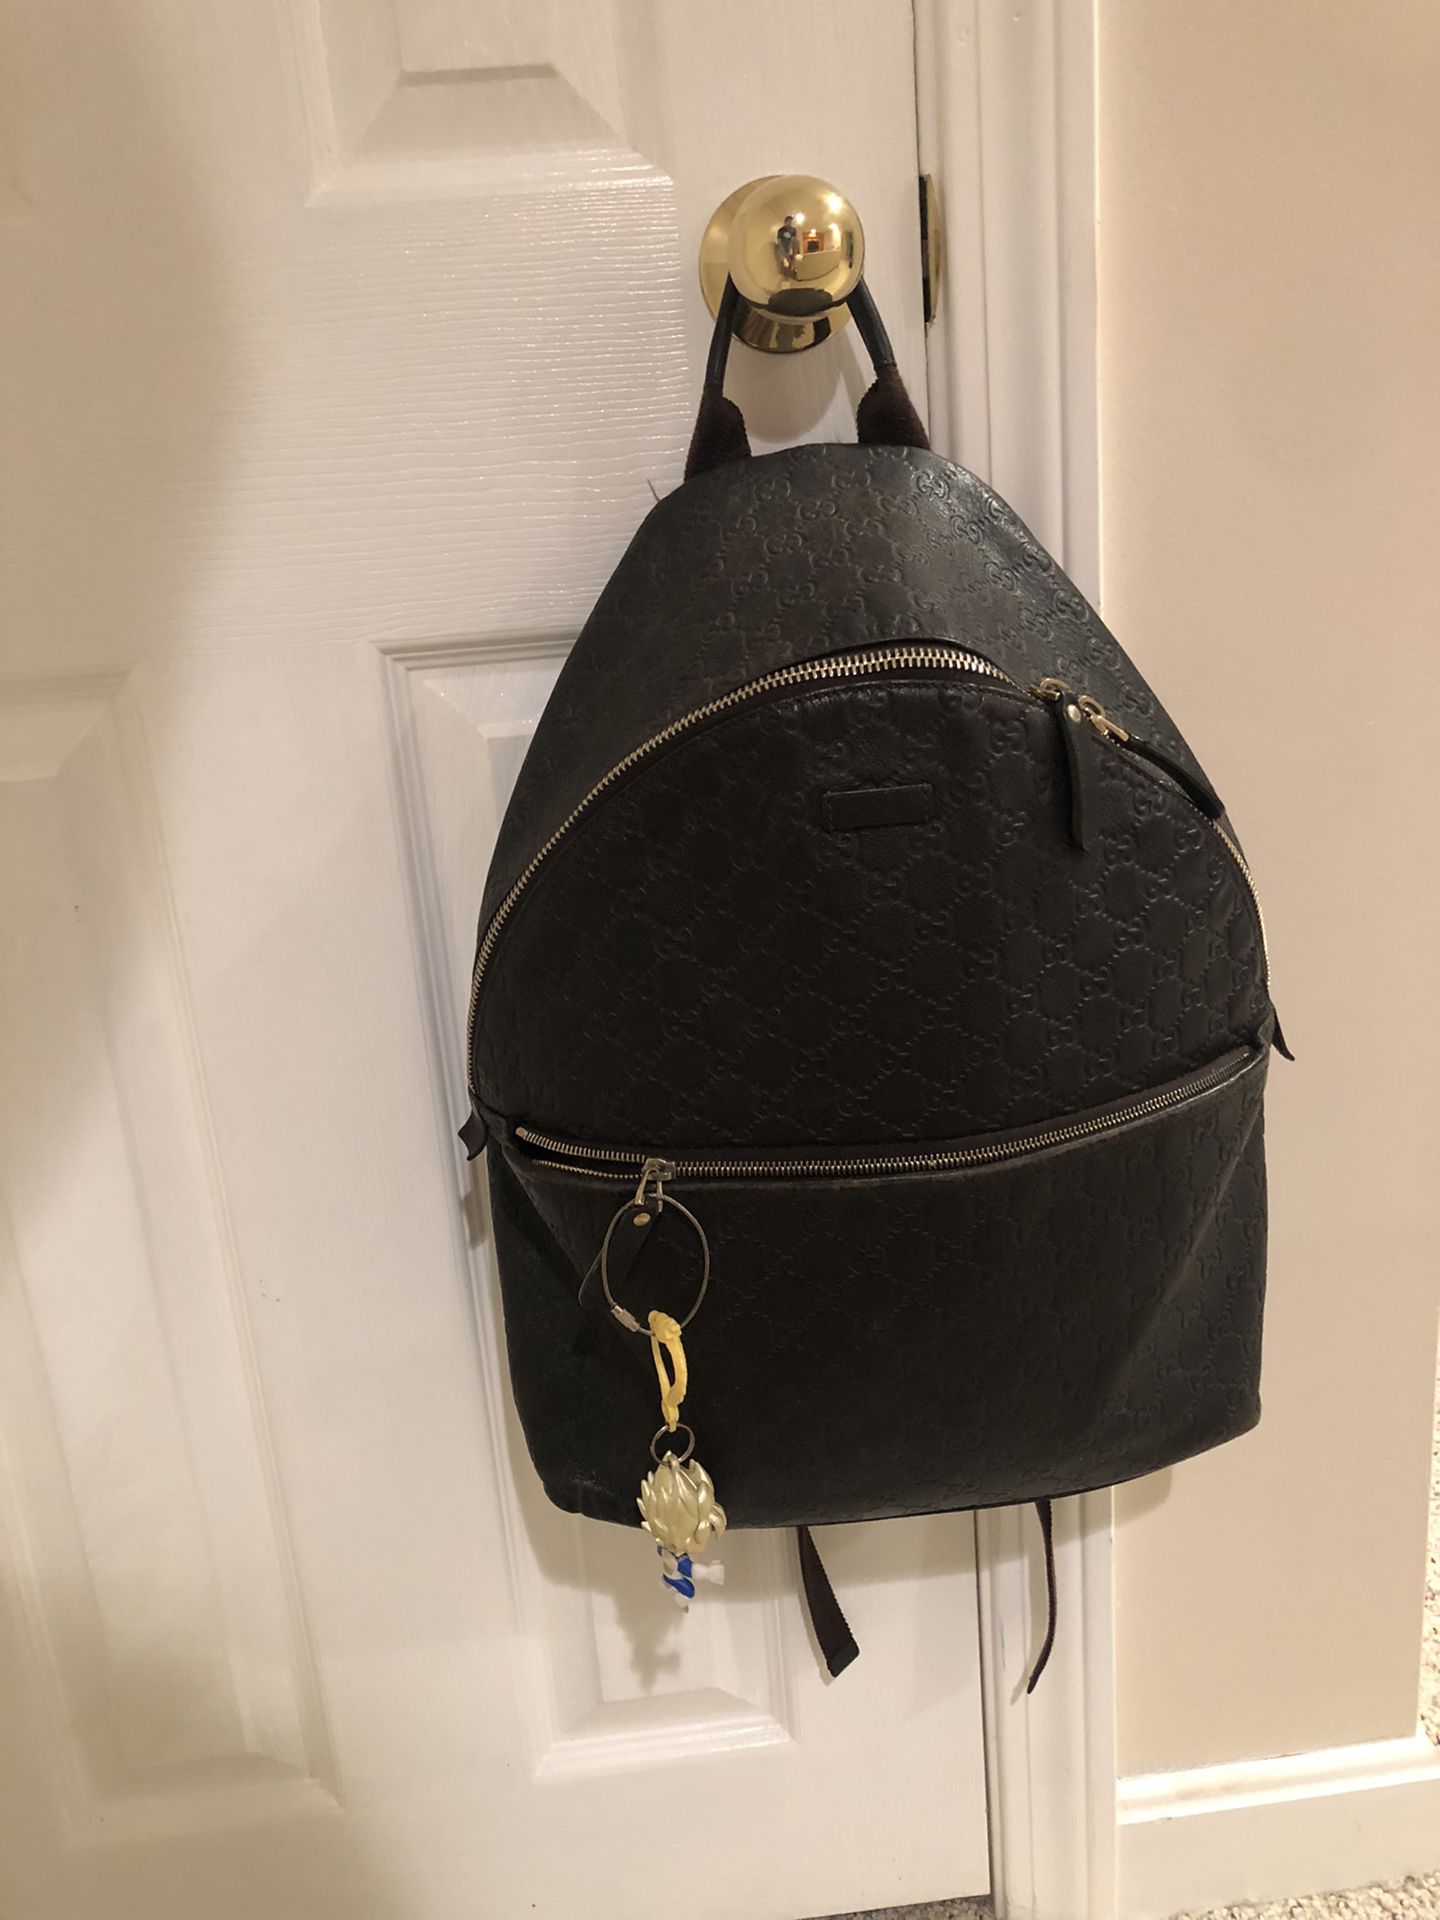 Gucci “Guccissima” leather zip backpack